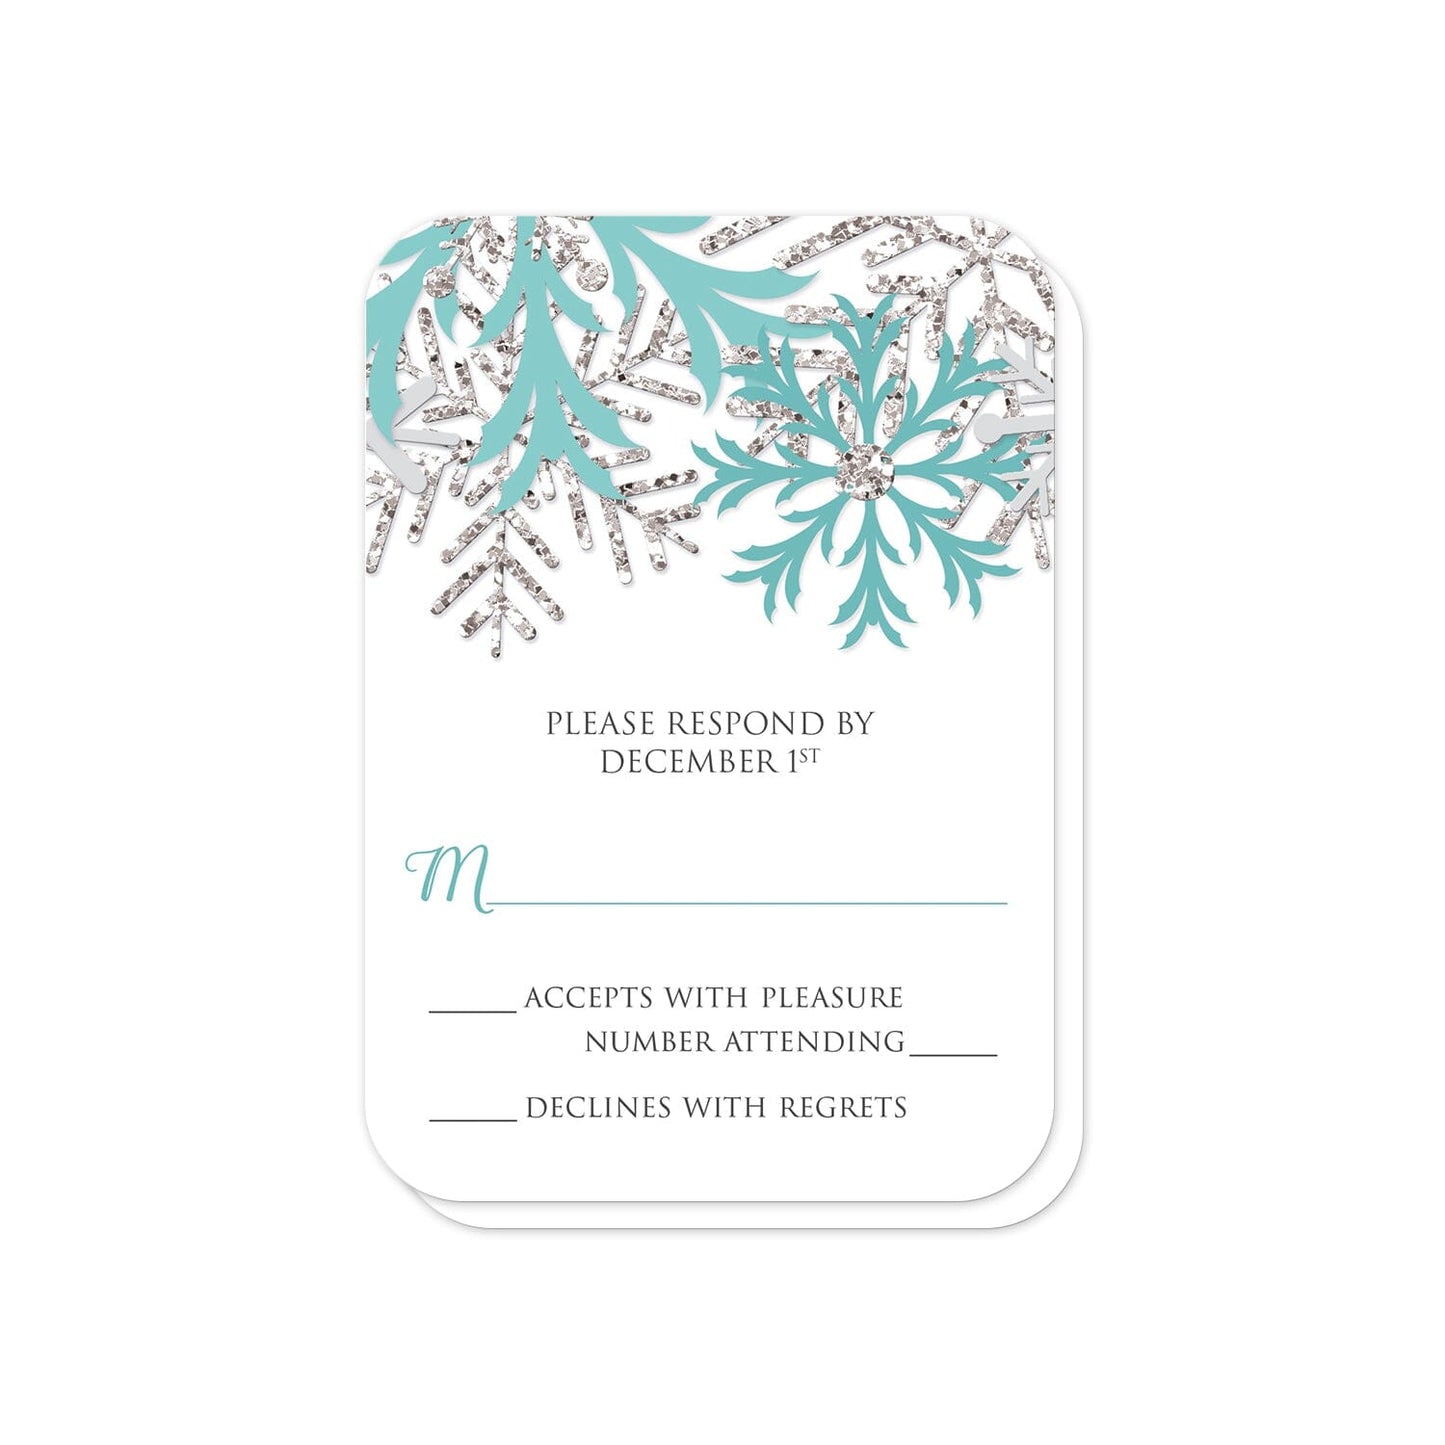 Winter Teal Silver Snowflake RSVP Cards (with rounded corners) at Artistically Invited.